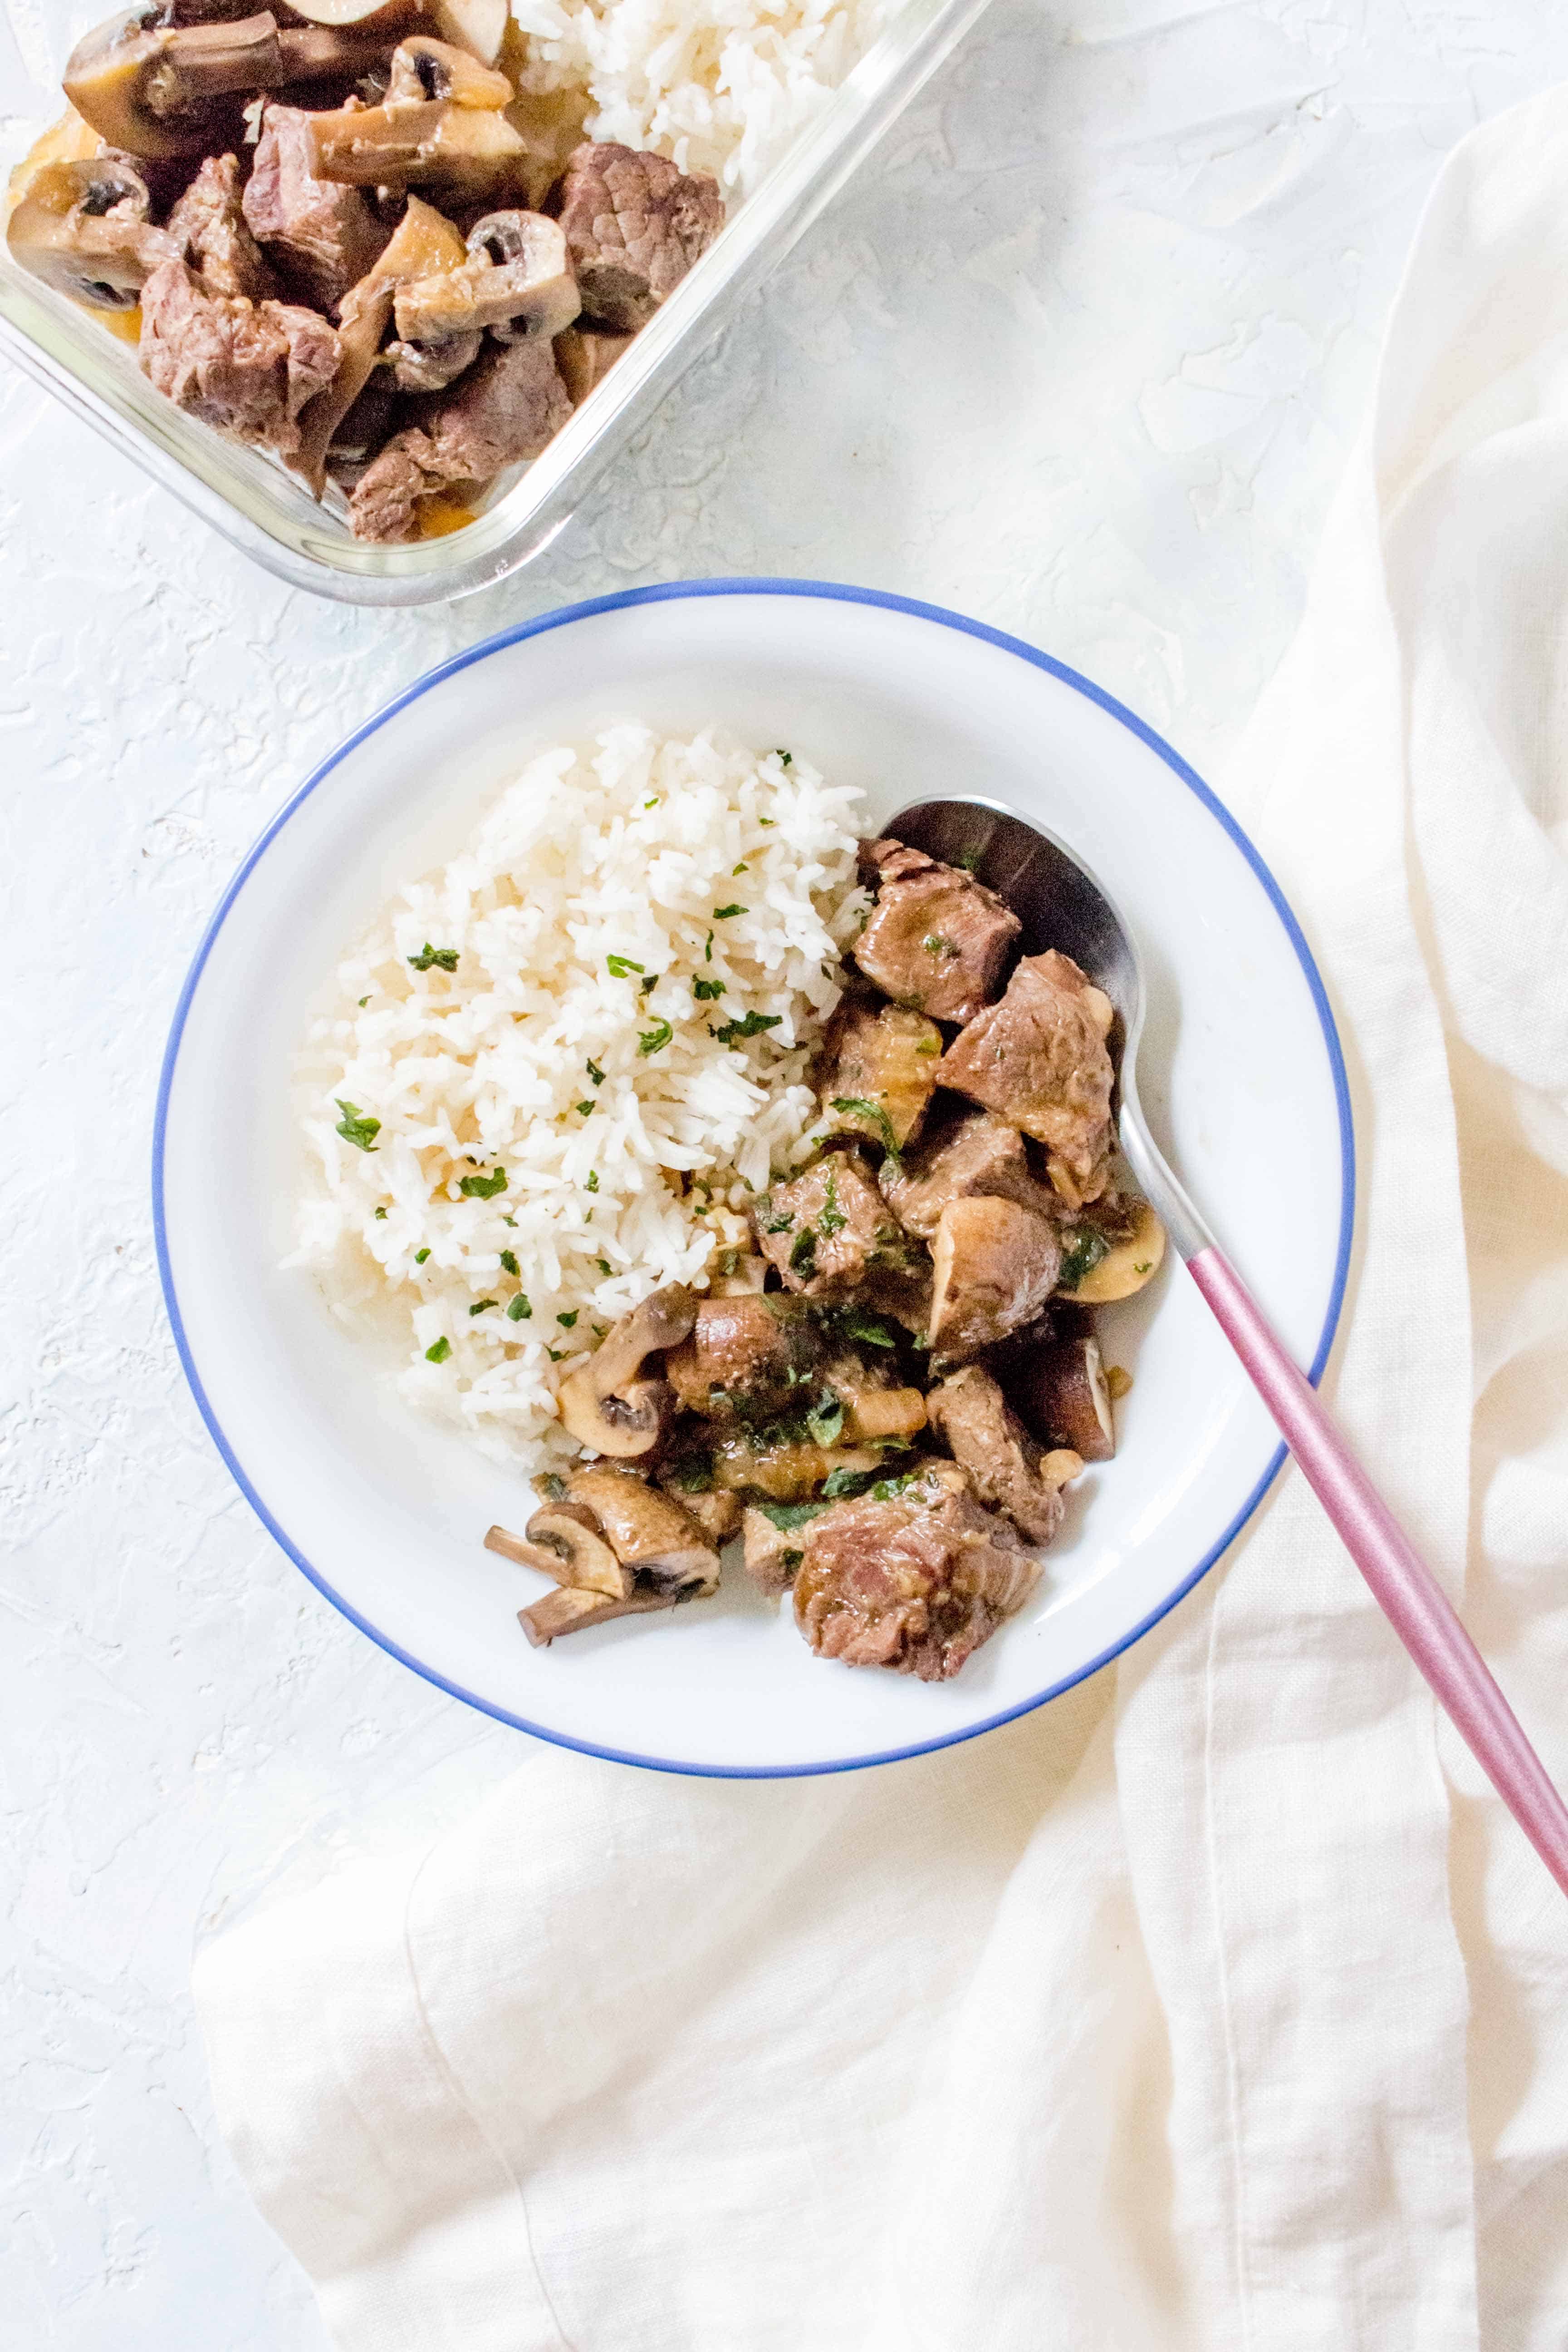 Inspired by Japanese Hibachi, this Instant Pot Steak and Mushrooms is saucy, full of flavour, and tender!